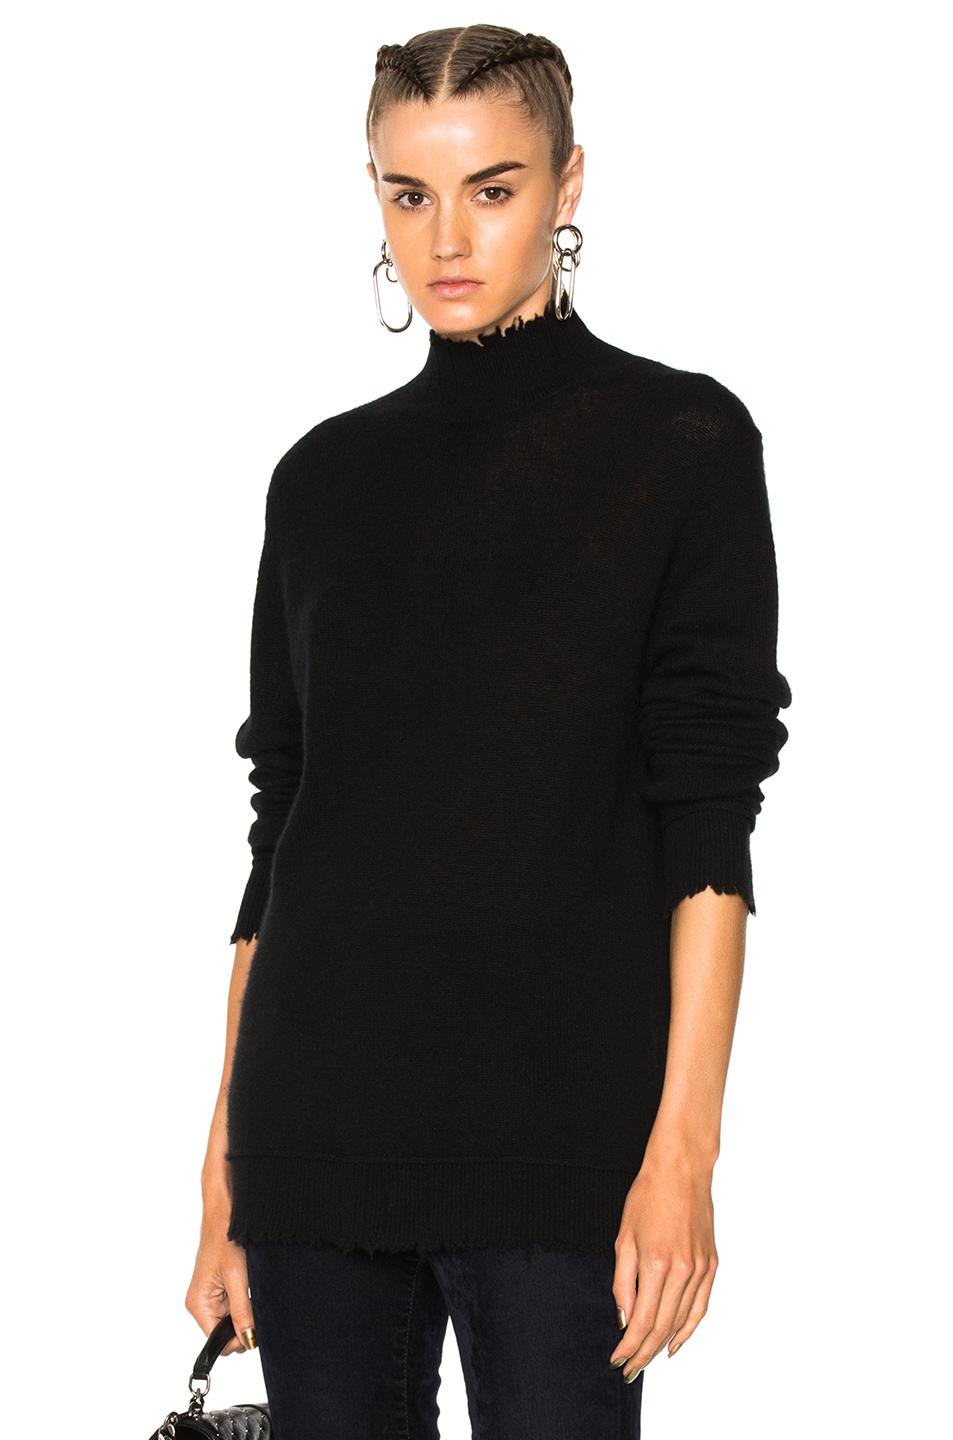 R13 Distressed Edge Cashmere Turtleneck Sweater in Black - Lyst